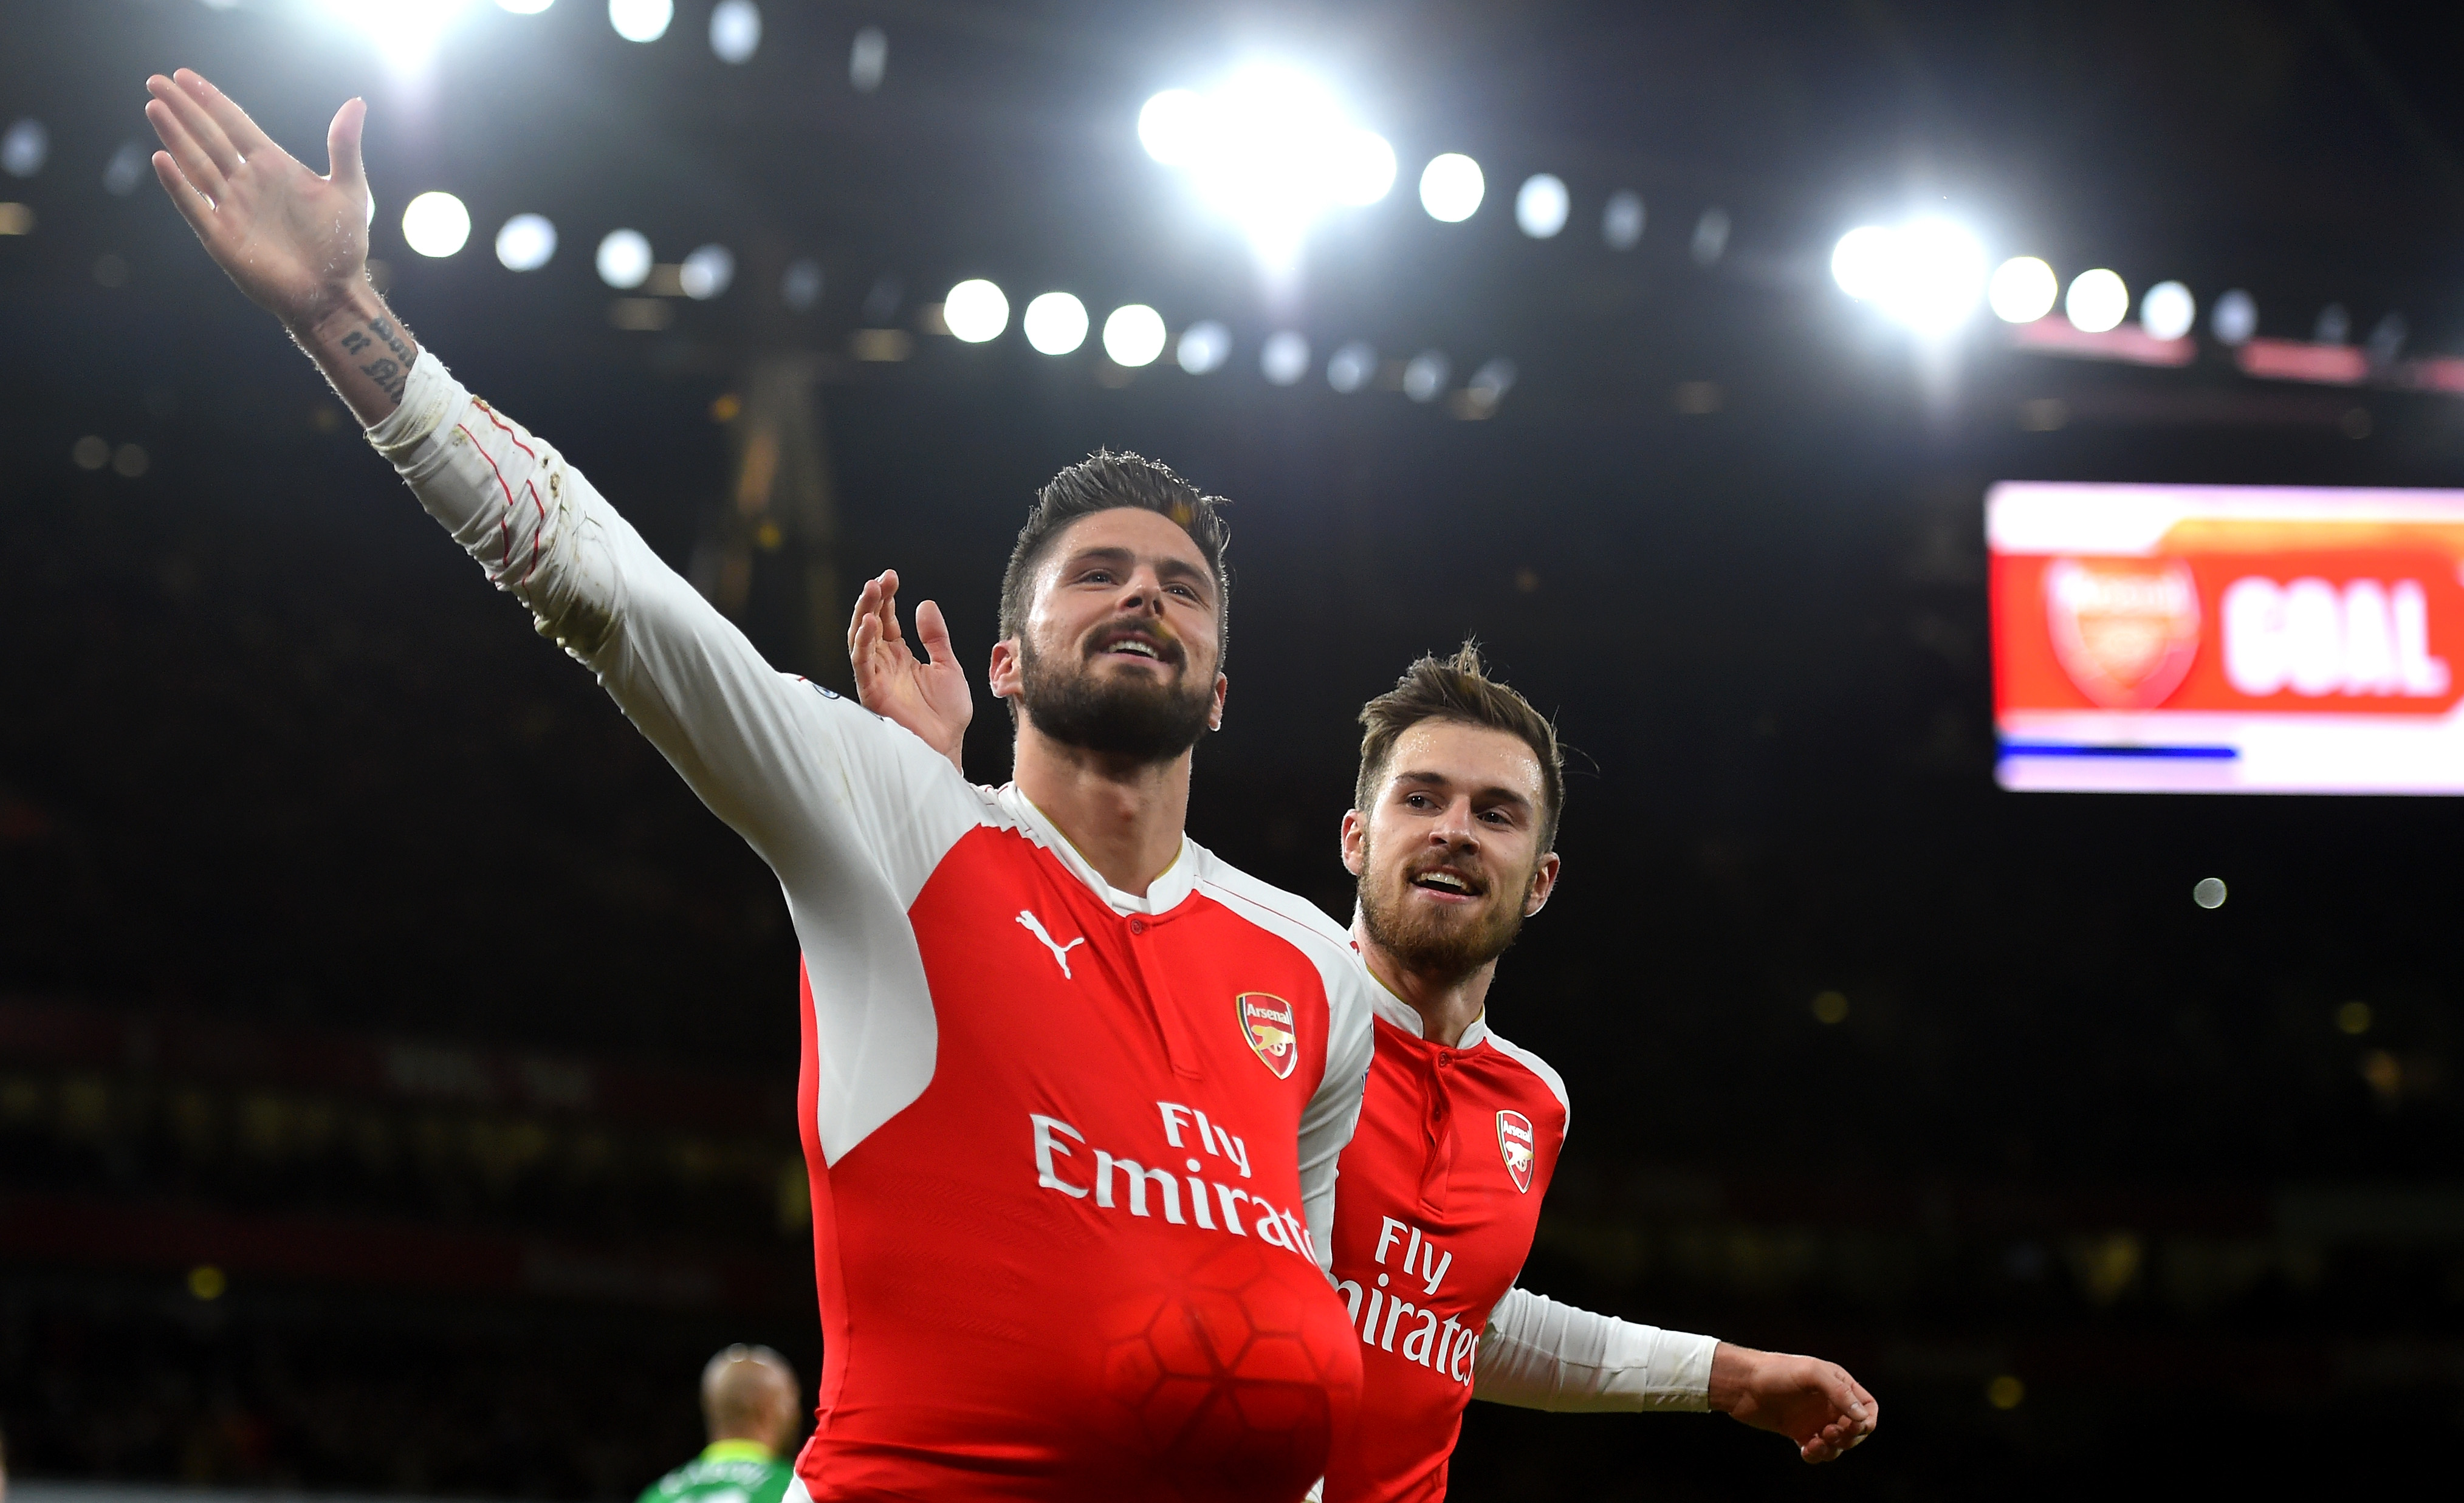 LONDON, ENGLAND - DECEMBER 05:  Olivier Giroud (L) of Arsenal celebrates scoring his team's second goal with his team mate Aaron Ramsey (R)during the Barclays Premier League match between Arsenal and Sunderland at Emirates Stadiumon December 5, 2015 in London, England.  (Photo by Shaun Botterill/Getty Images)